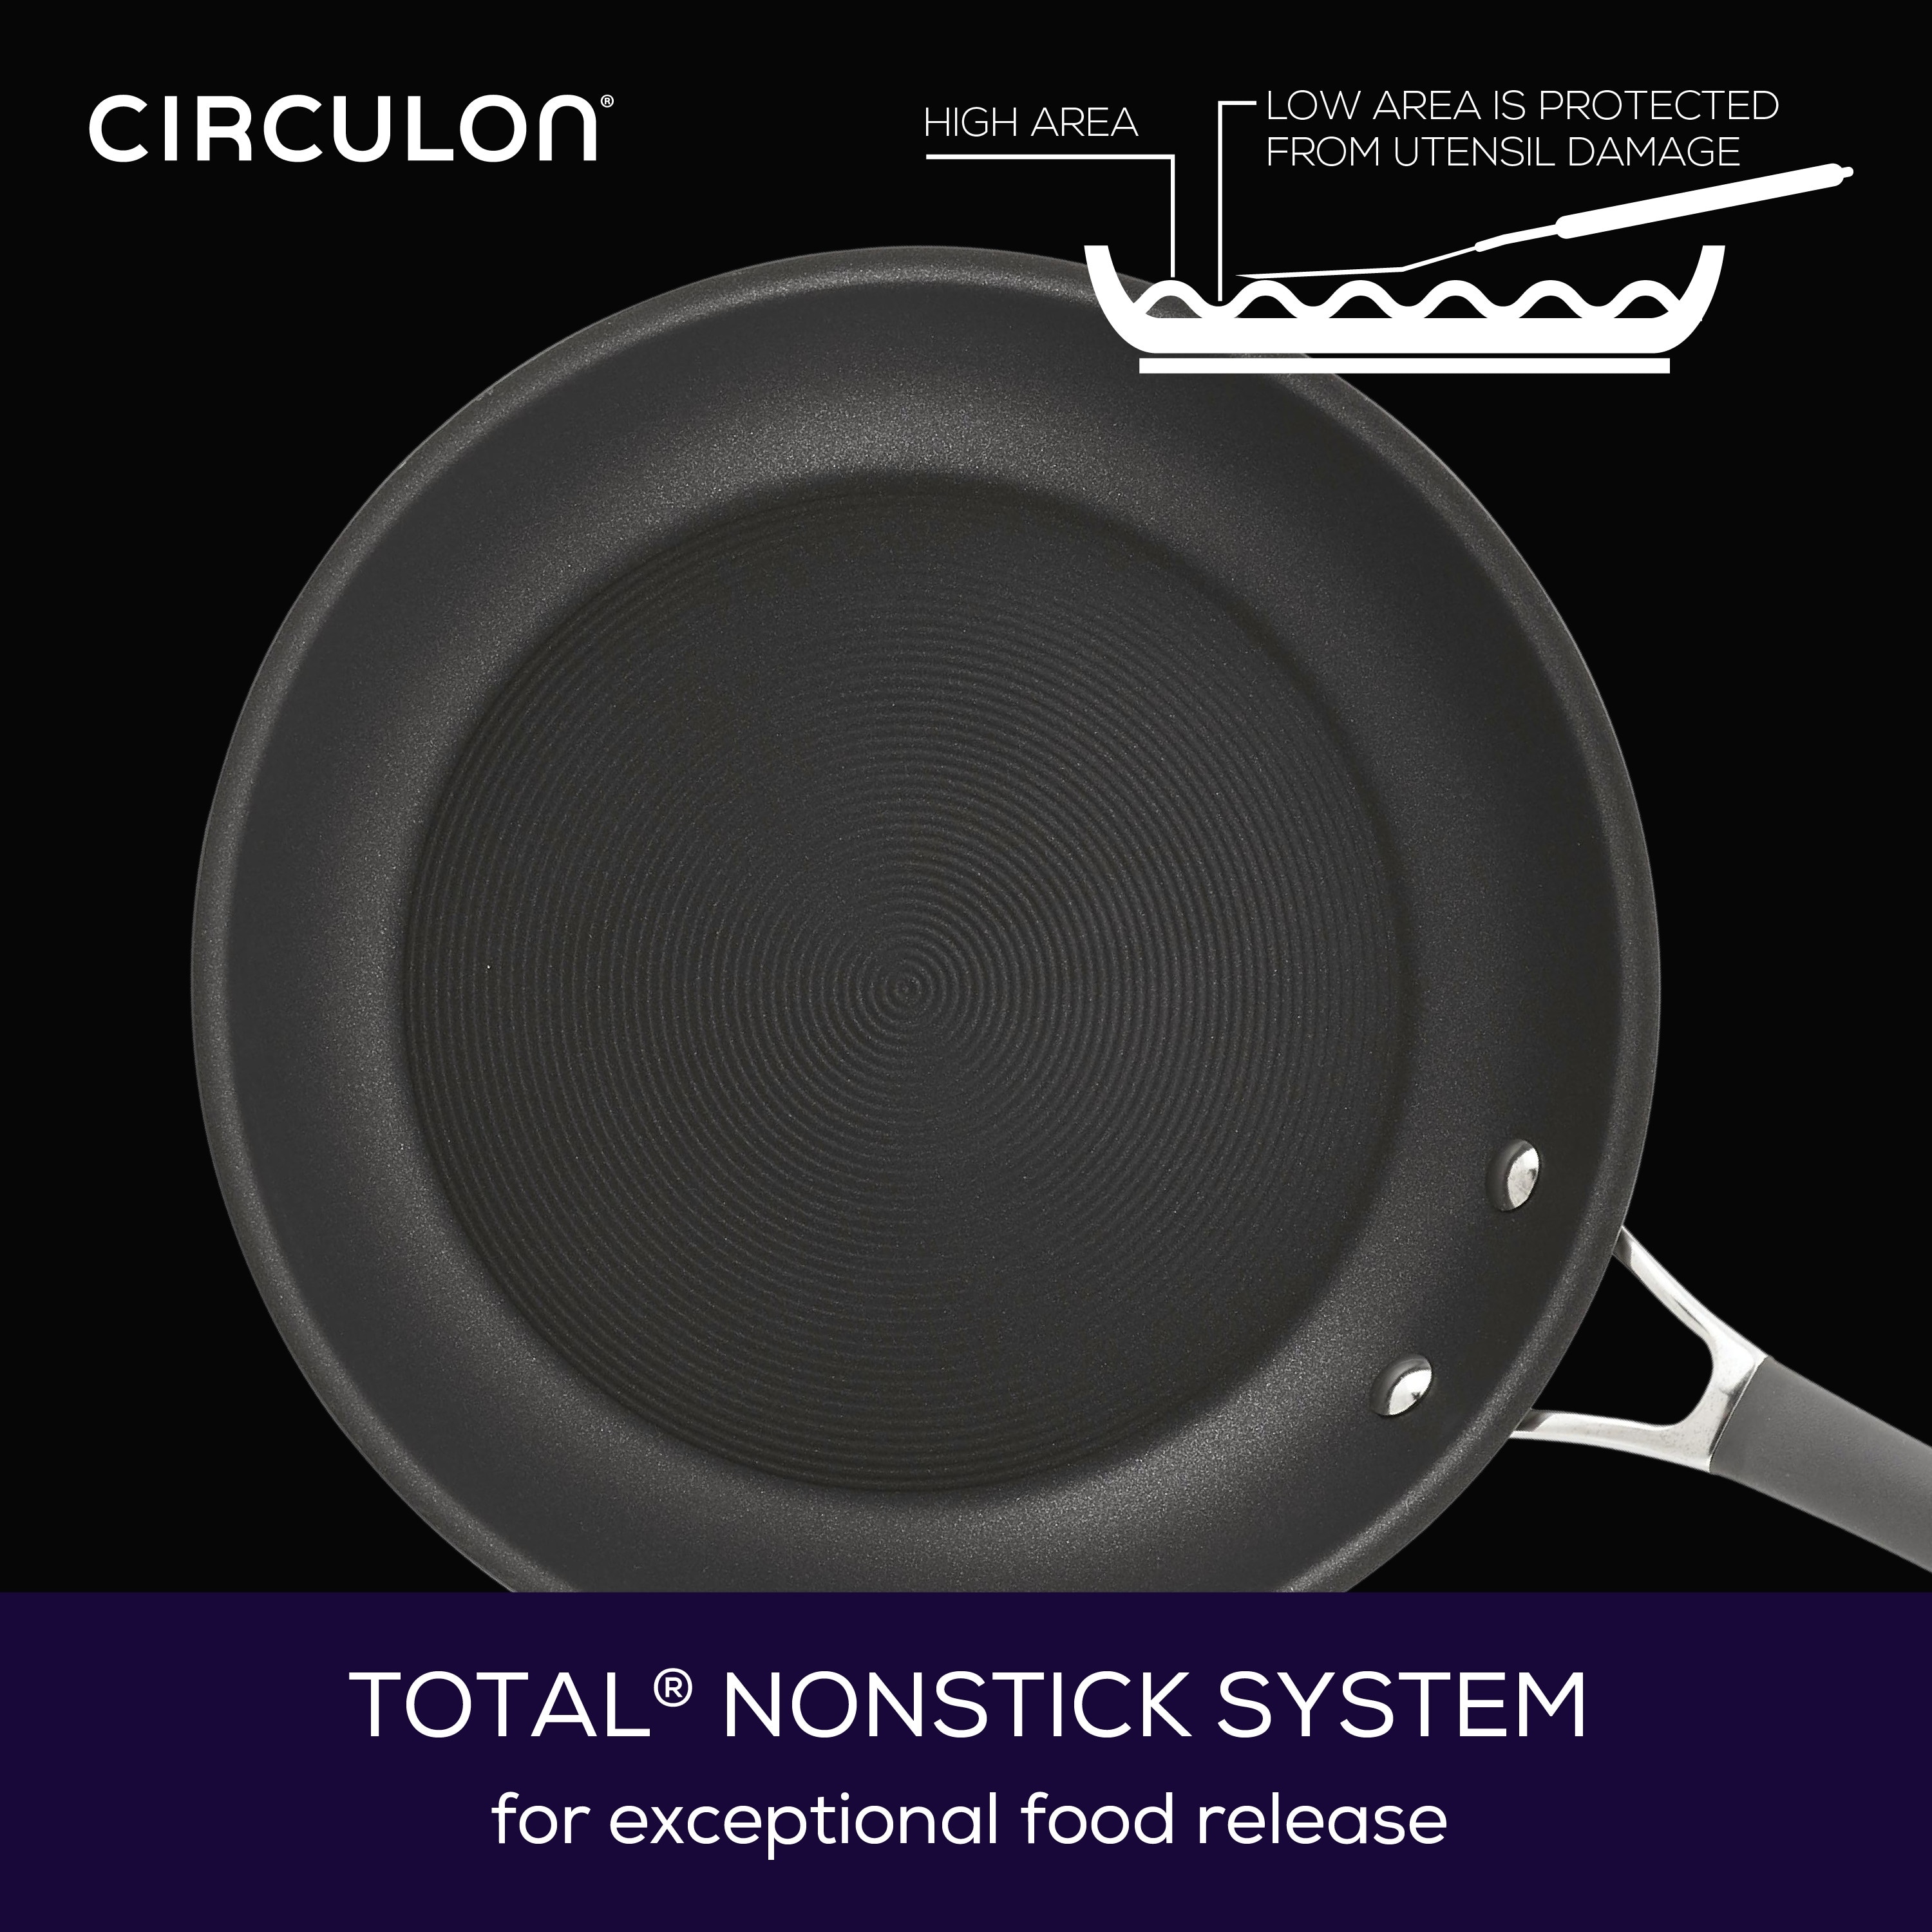  Circulon Radiance Deep Hard Anodized Nonstick Frying Pan / Skillet with Lid - 12 Inch, Gray: Home & Kitchen